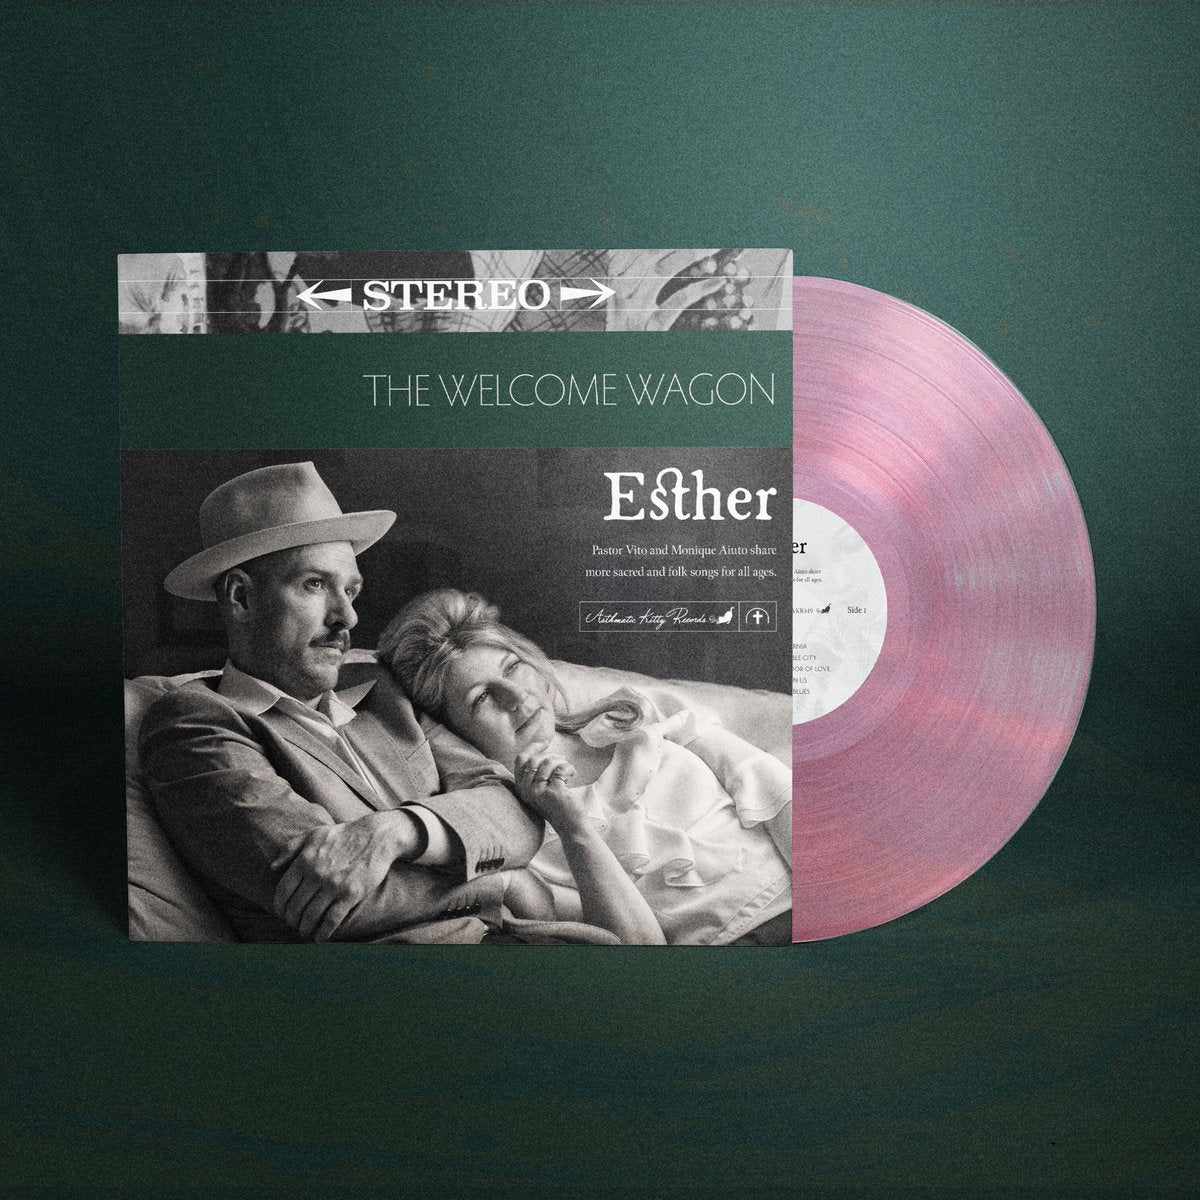 The Welcome Wagon - Esther - New LP Record 2022 Asthmatic Kitty Pink Vinyl - Folk / Gospel